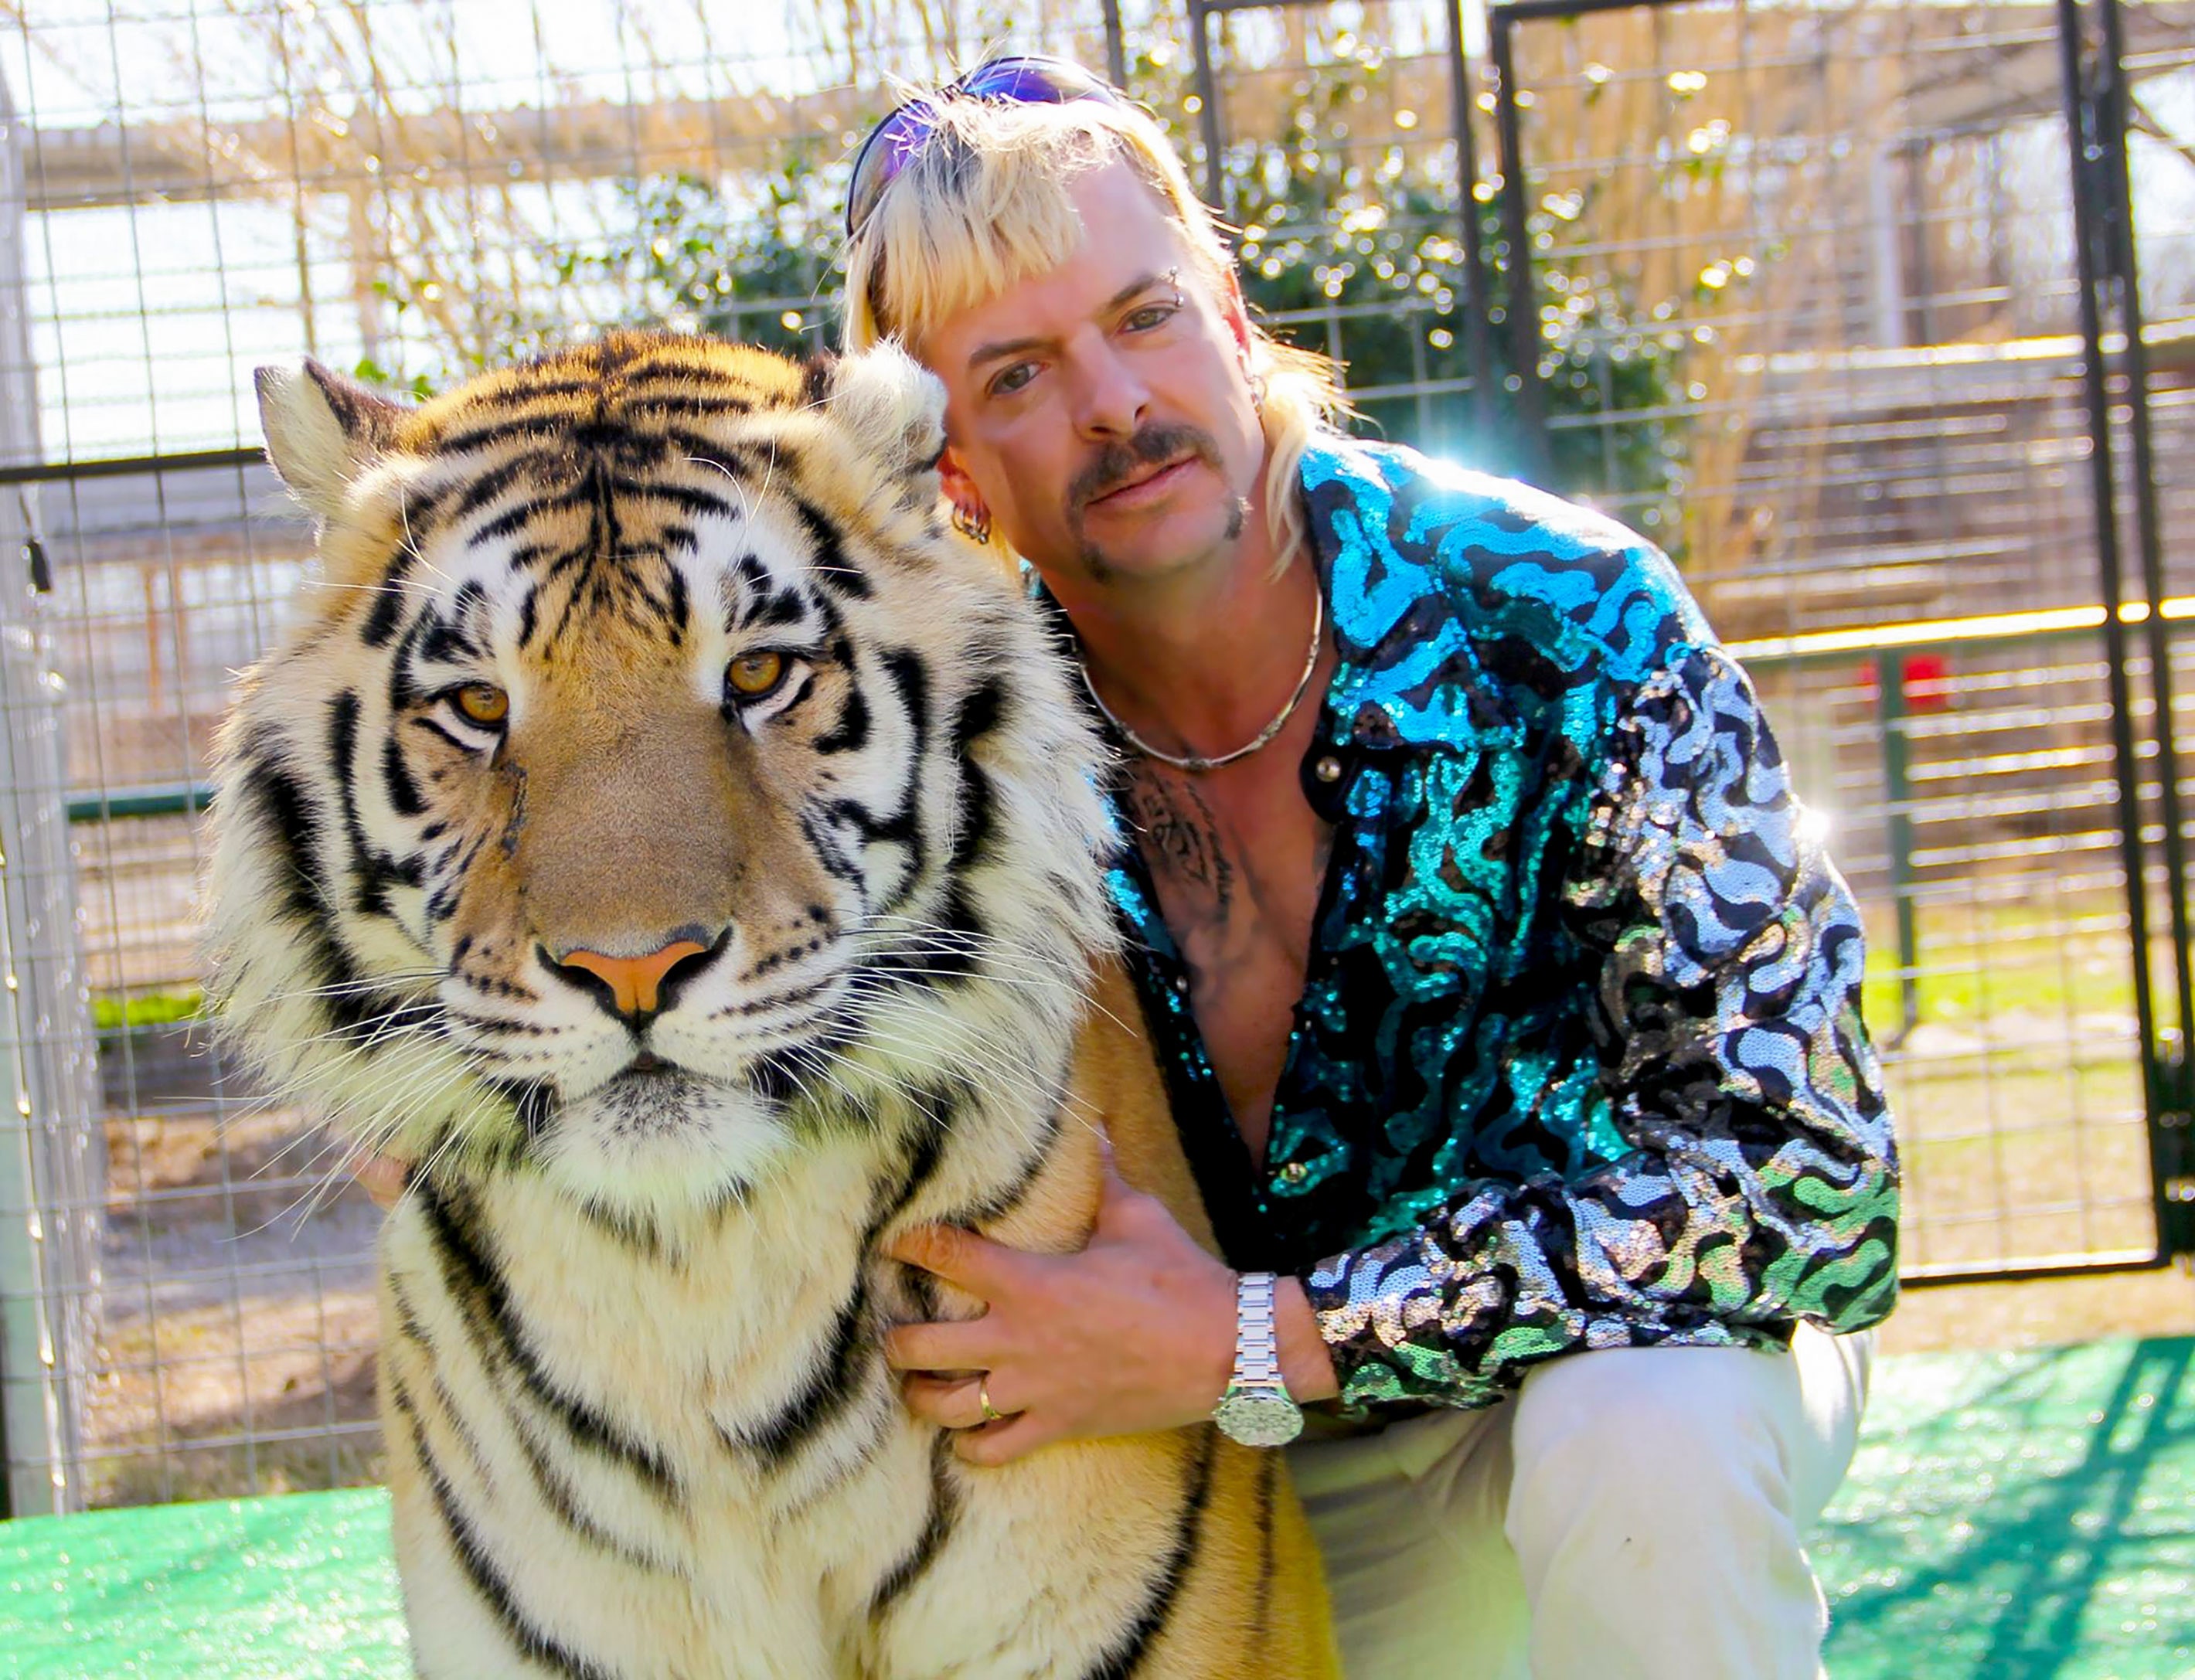 A man with a flashy blue sequined shirt crouches low, embracing a tiger and looking at the camera.